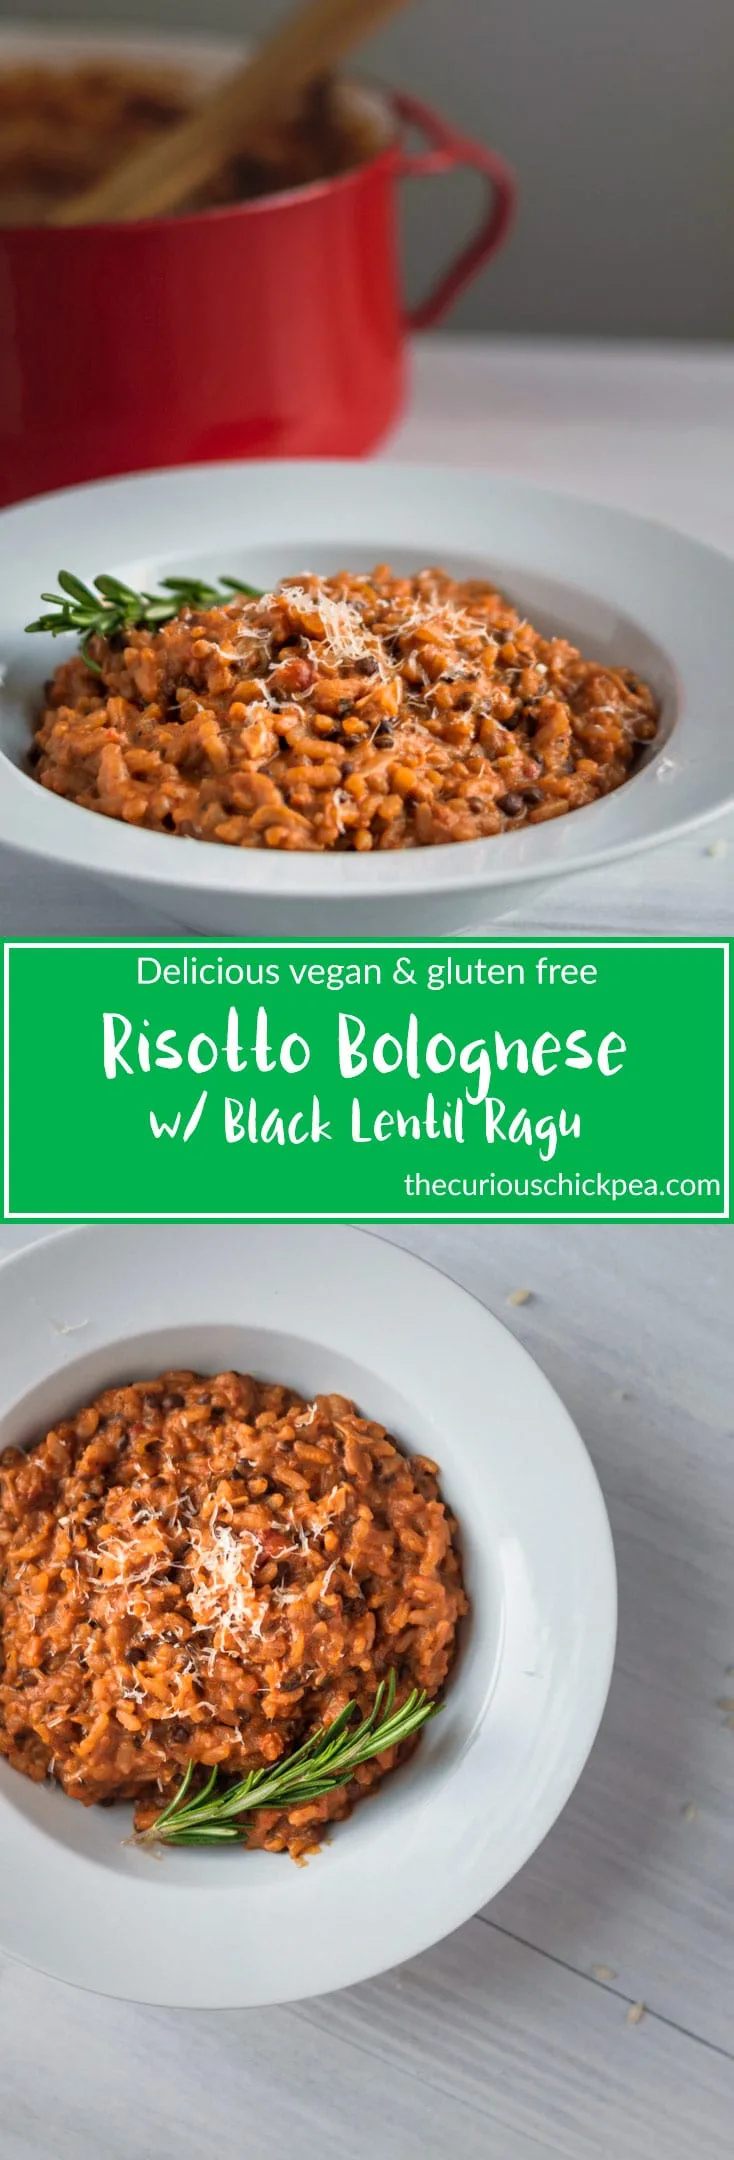 Risotto Bolognese | Vegan, Gluten Free. Creamy risotto is stuffed full of homemade black lentil bolognese sauce for a delicious, rich tasting entree. | thecuriouschickpea.com #vegan #risotto